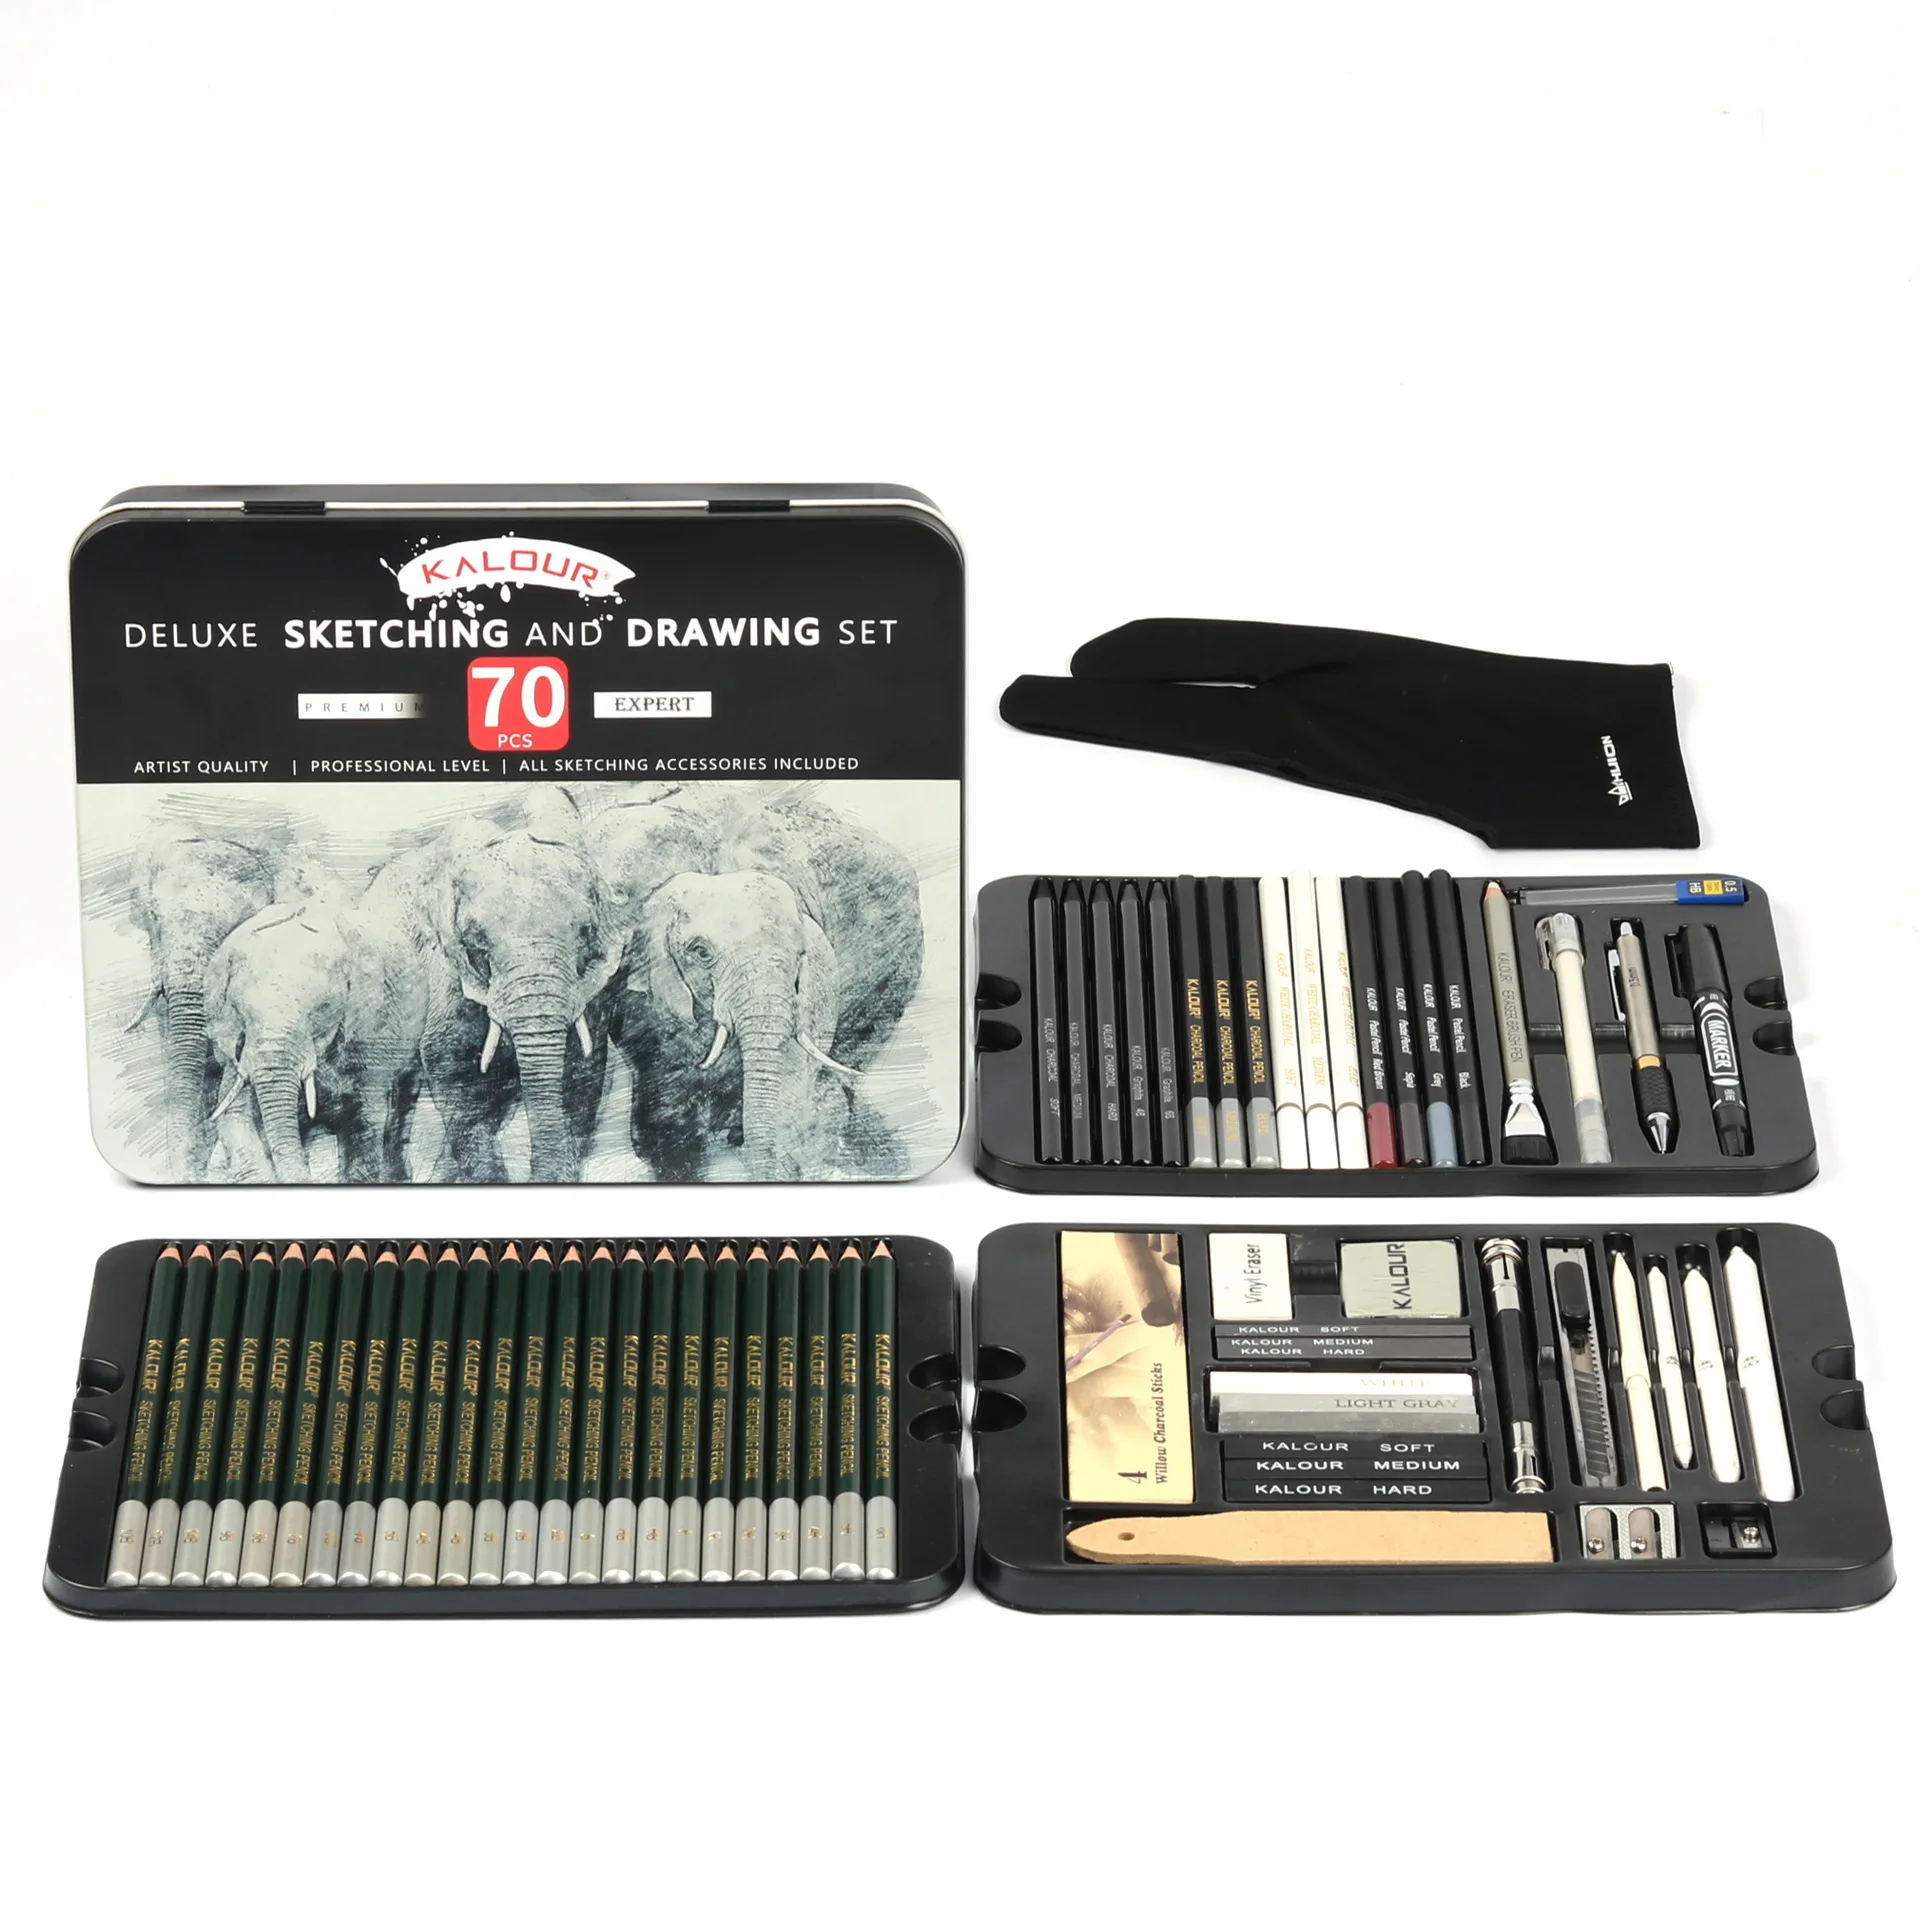 HIFORNY 70 Pcs Drawing Set Sketching Kit - Sketch Pencils Art Supplies for  Adults Artists Kids with 3-Color Sketchbook,Graphite,Pastel,Charcoal